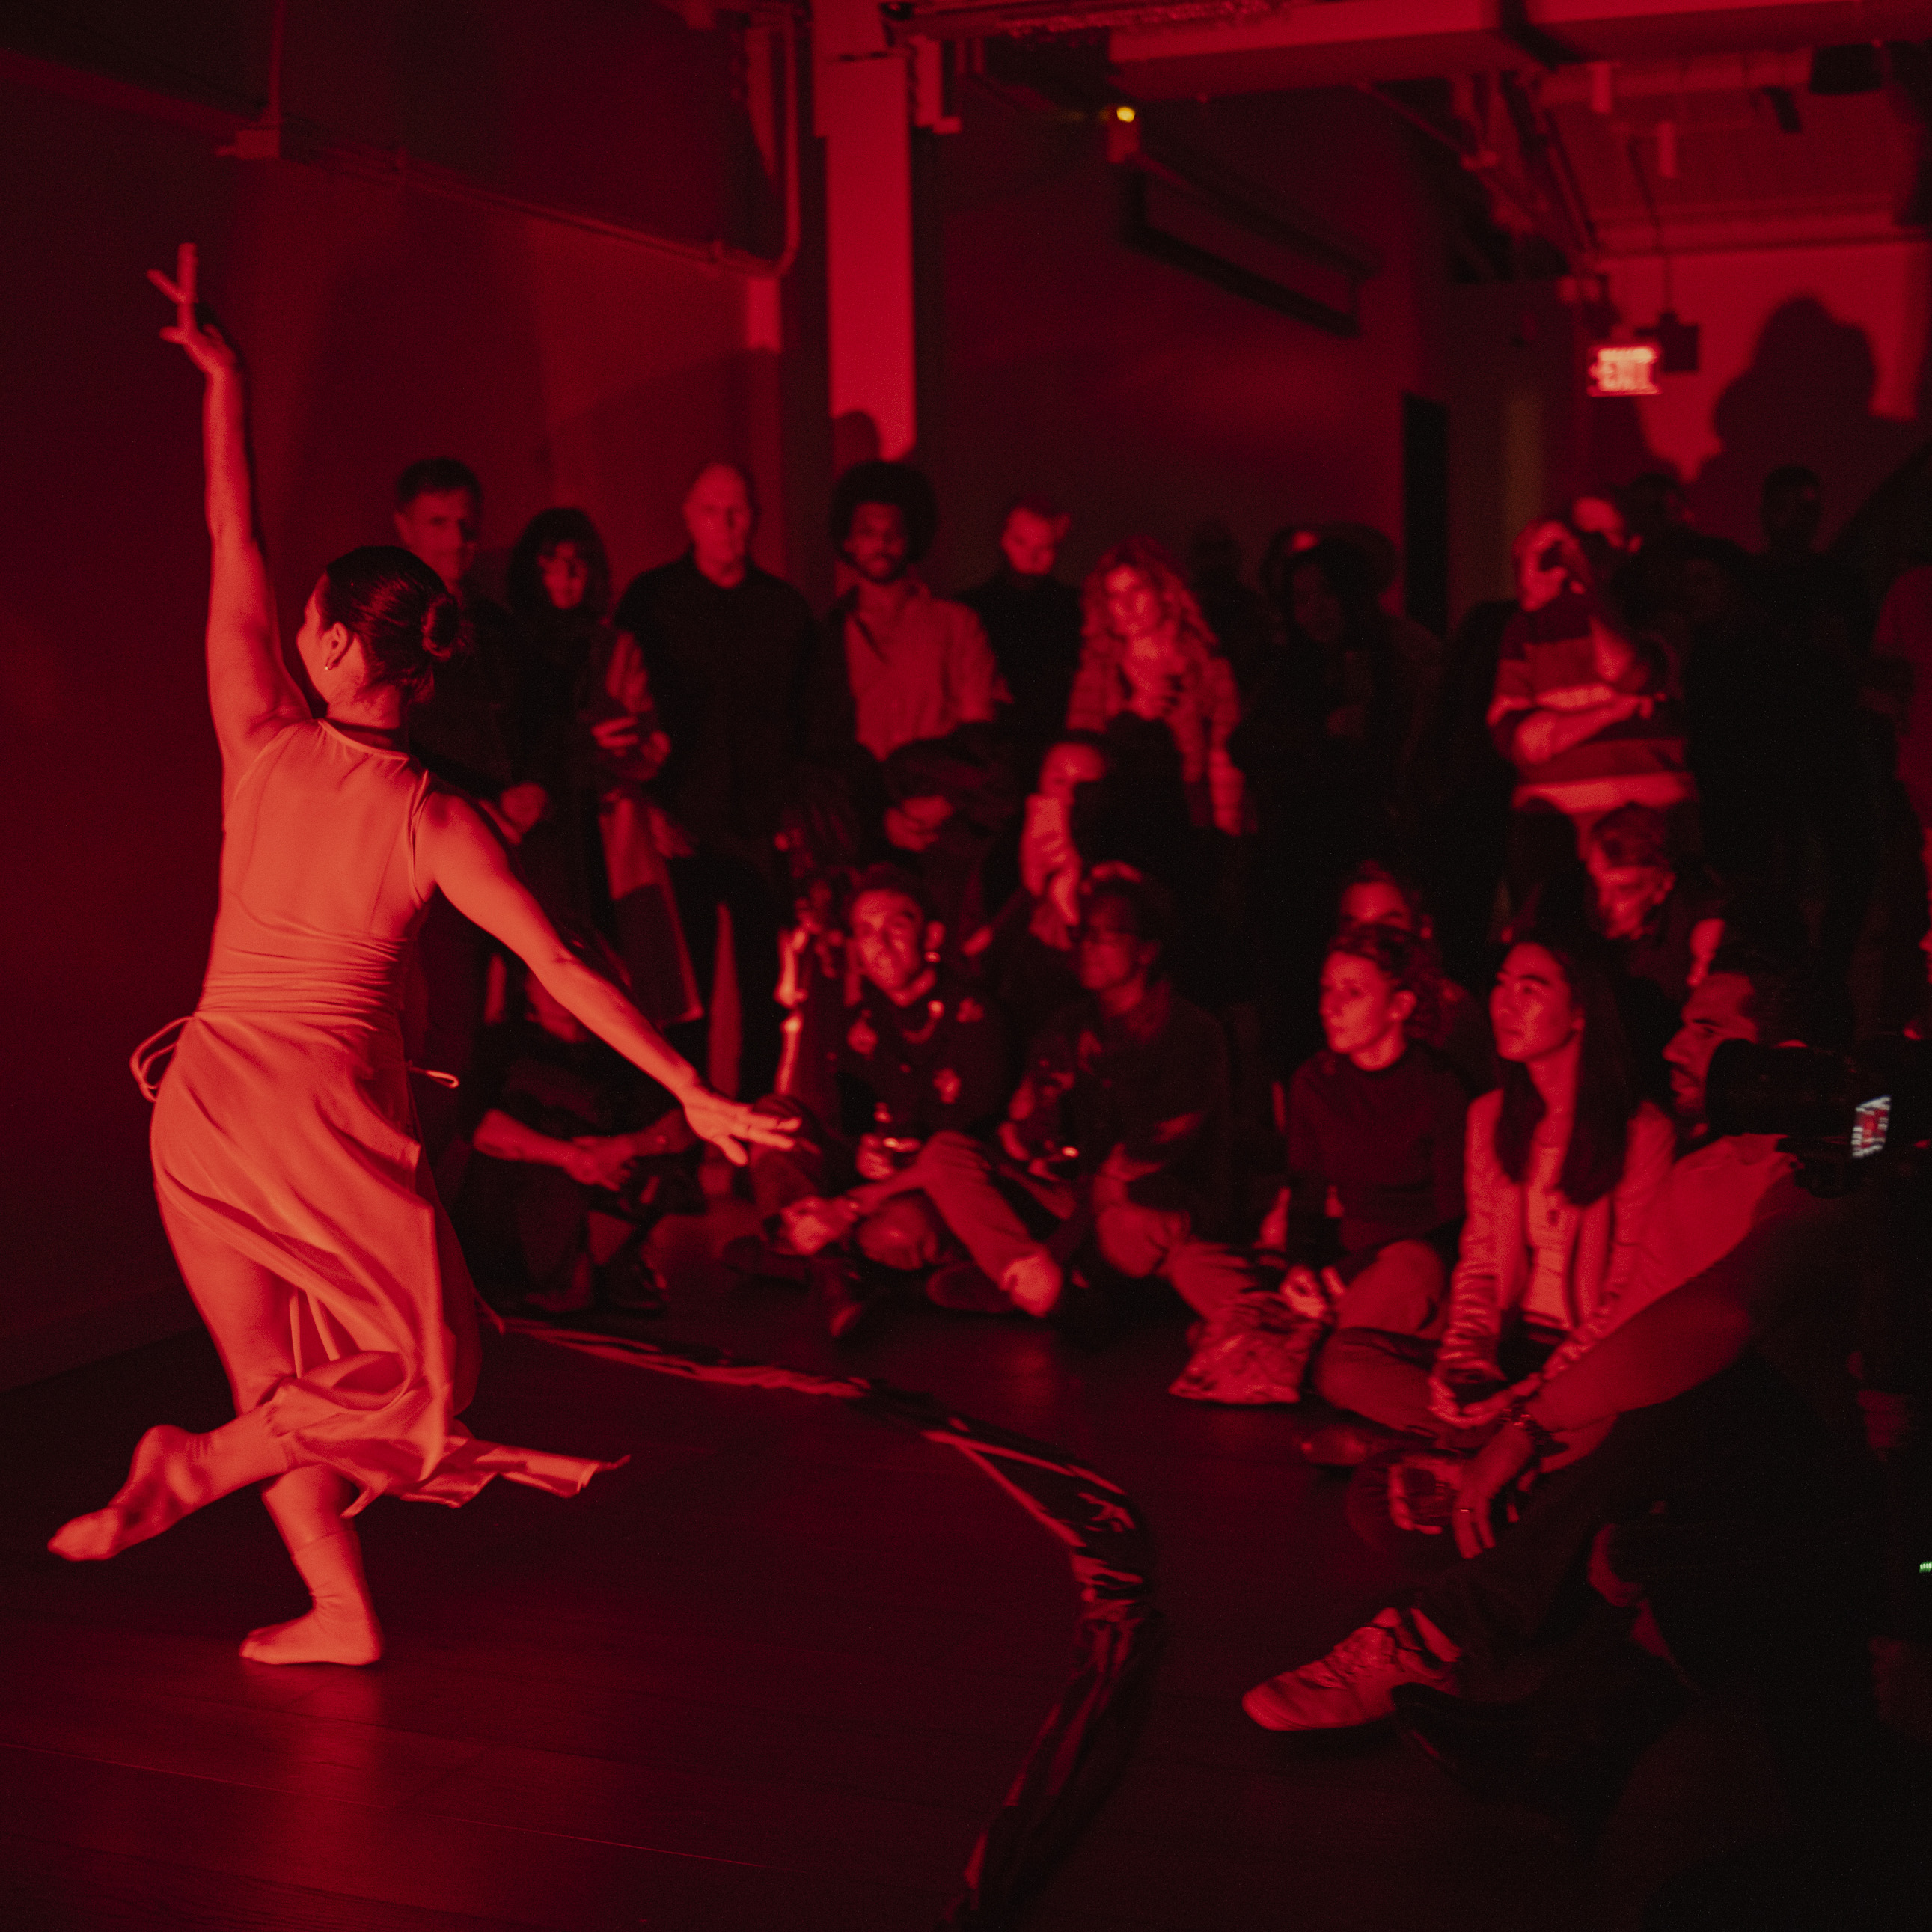 A dancer is performing in a dimly lit room bathed in red light, while a crowd of people attentively watches, some seated on the floor and others standing.